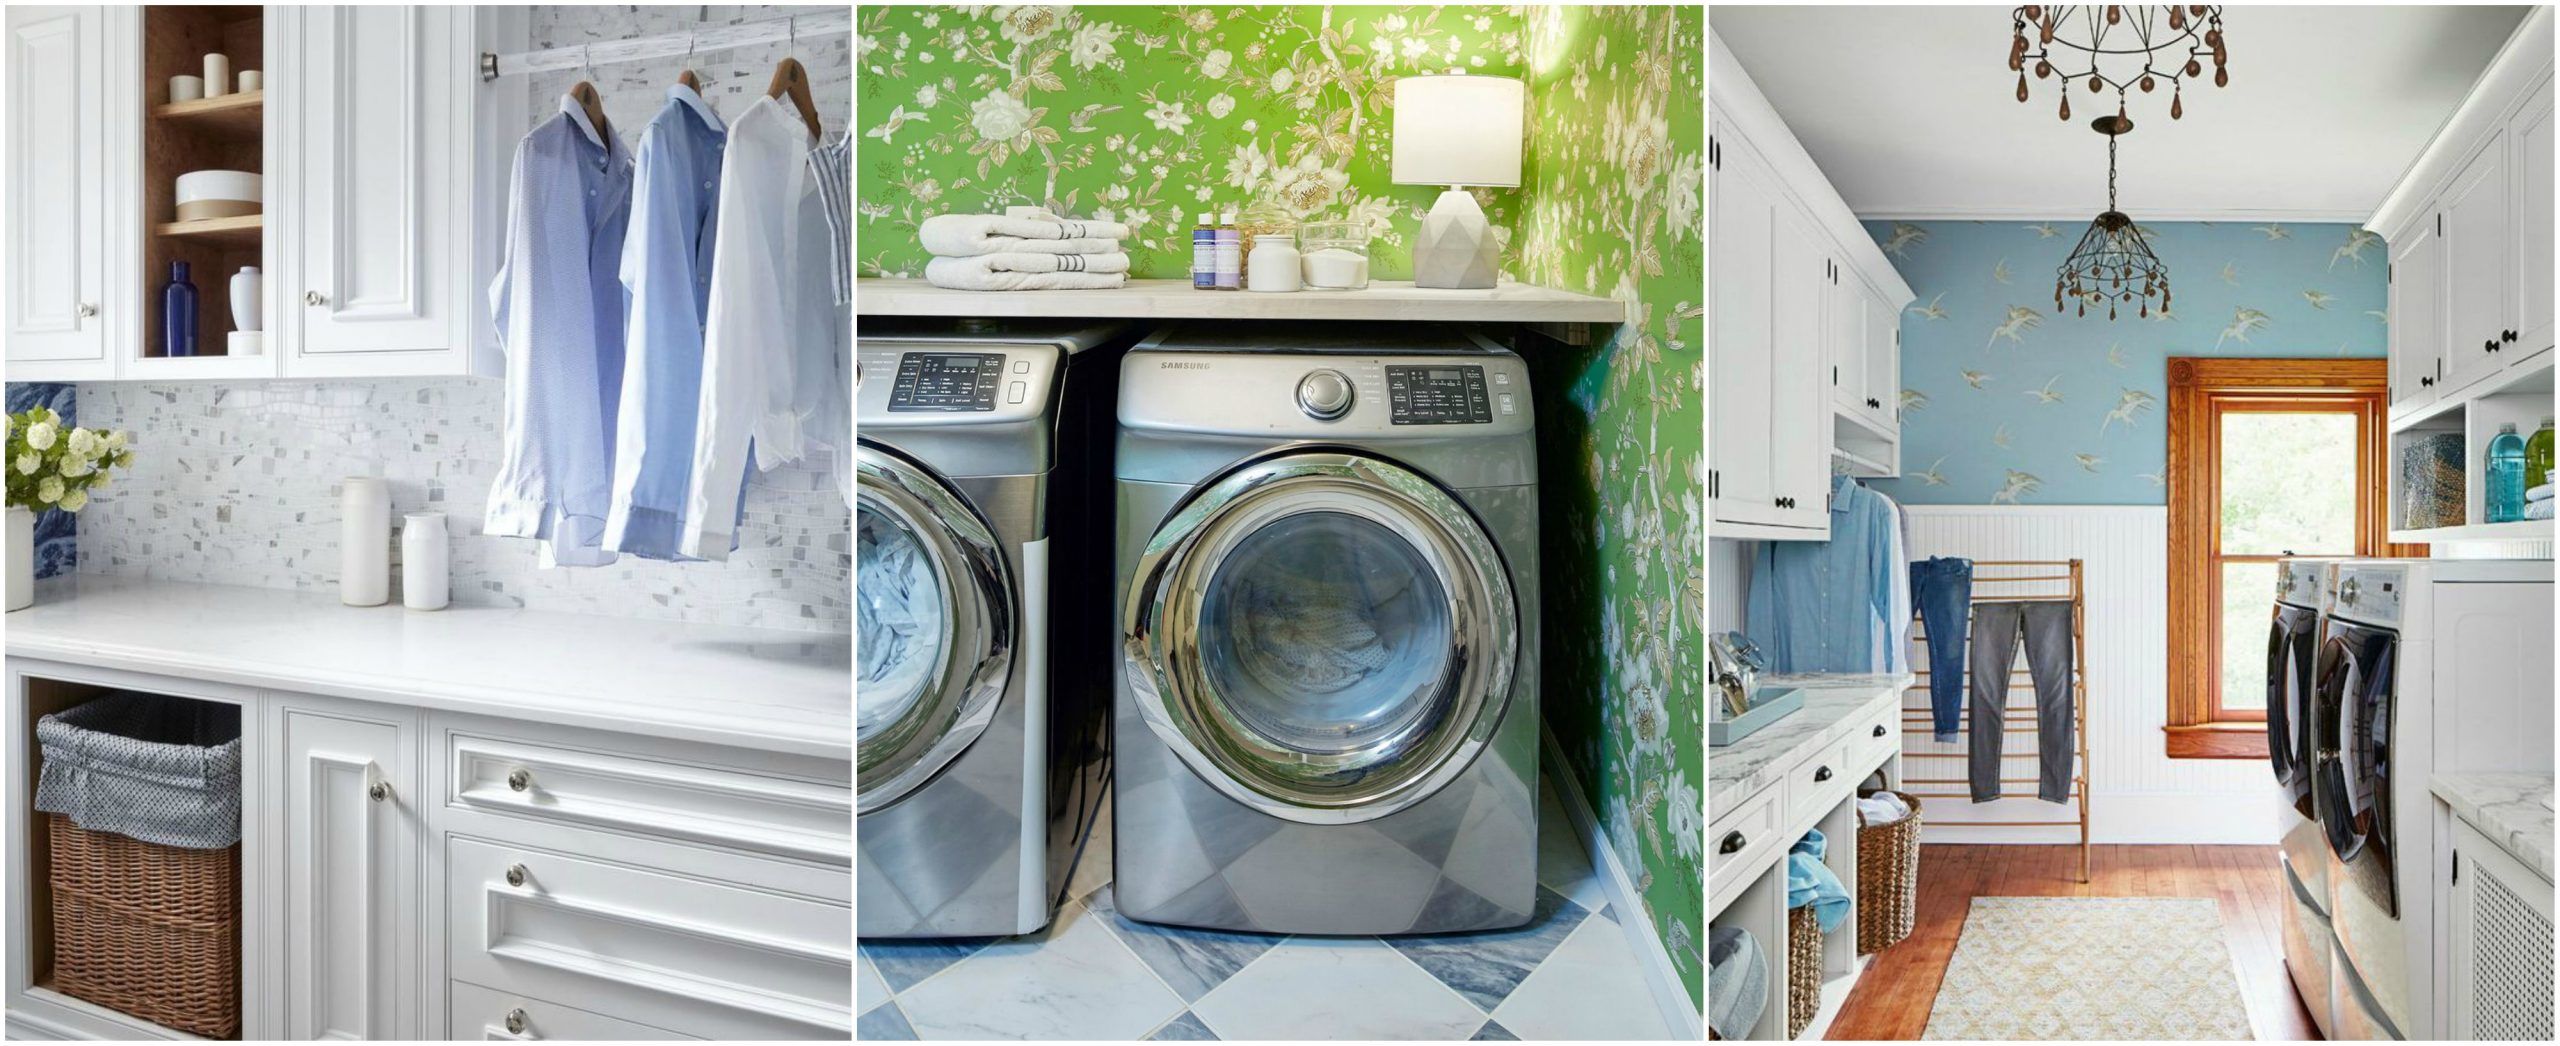 Laundry Room Decorating Ideas To Try In Your Home - World inside pictures